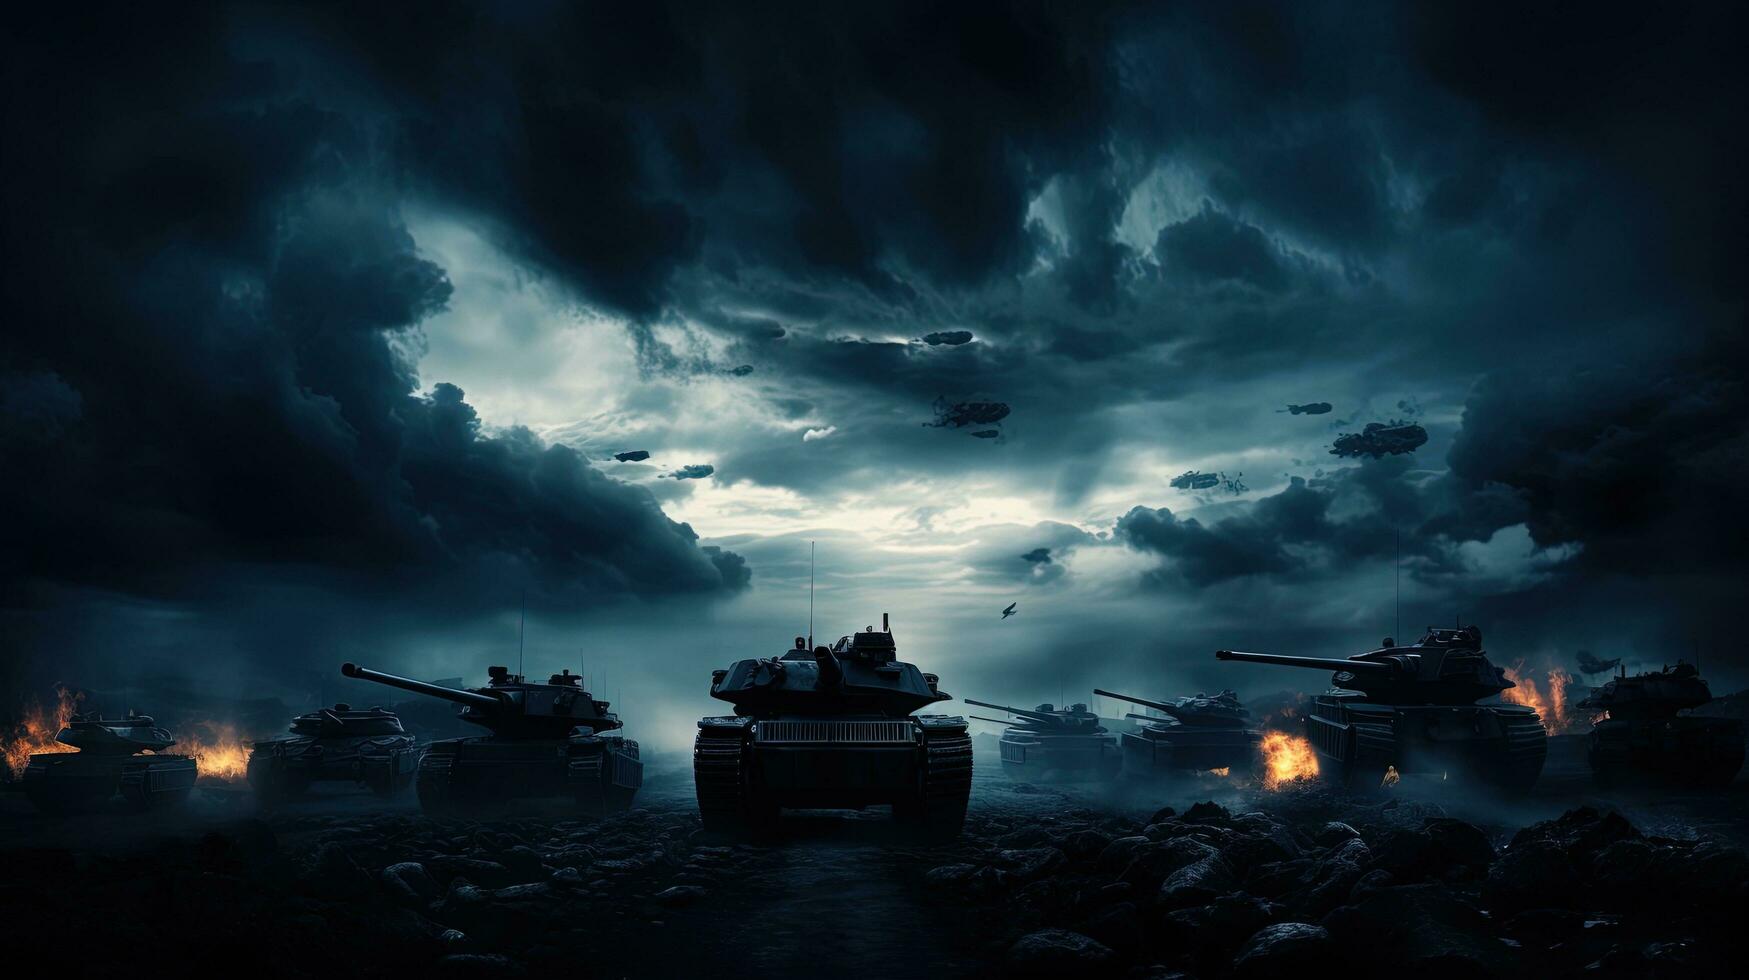 Military silhouettes battle below cloudy sky tanks and armored vehicles fight in war fog background photo